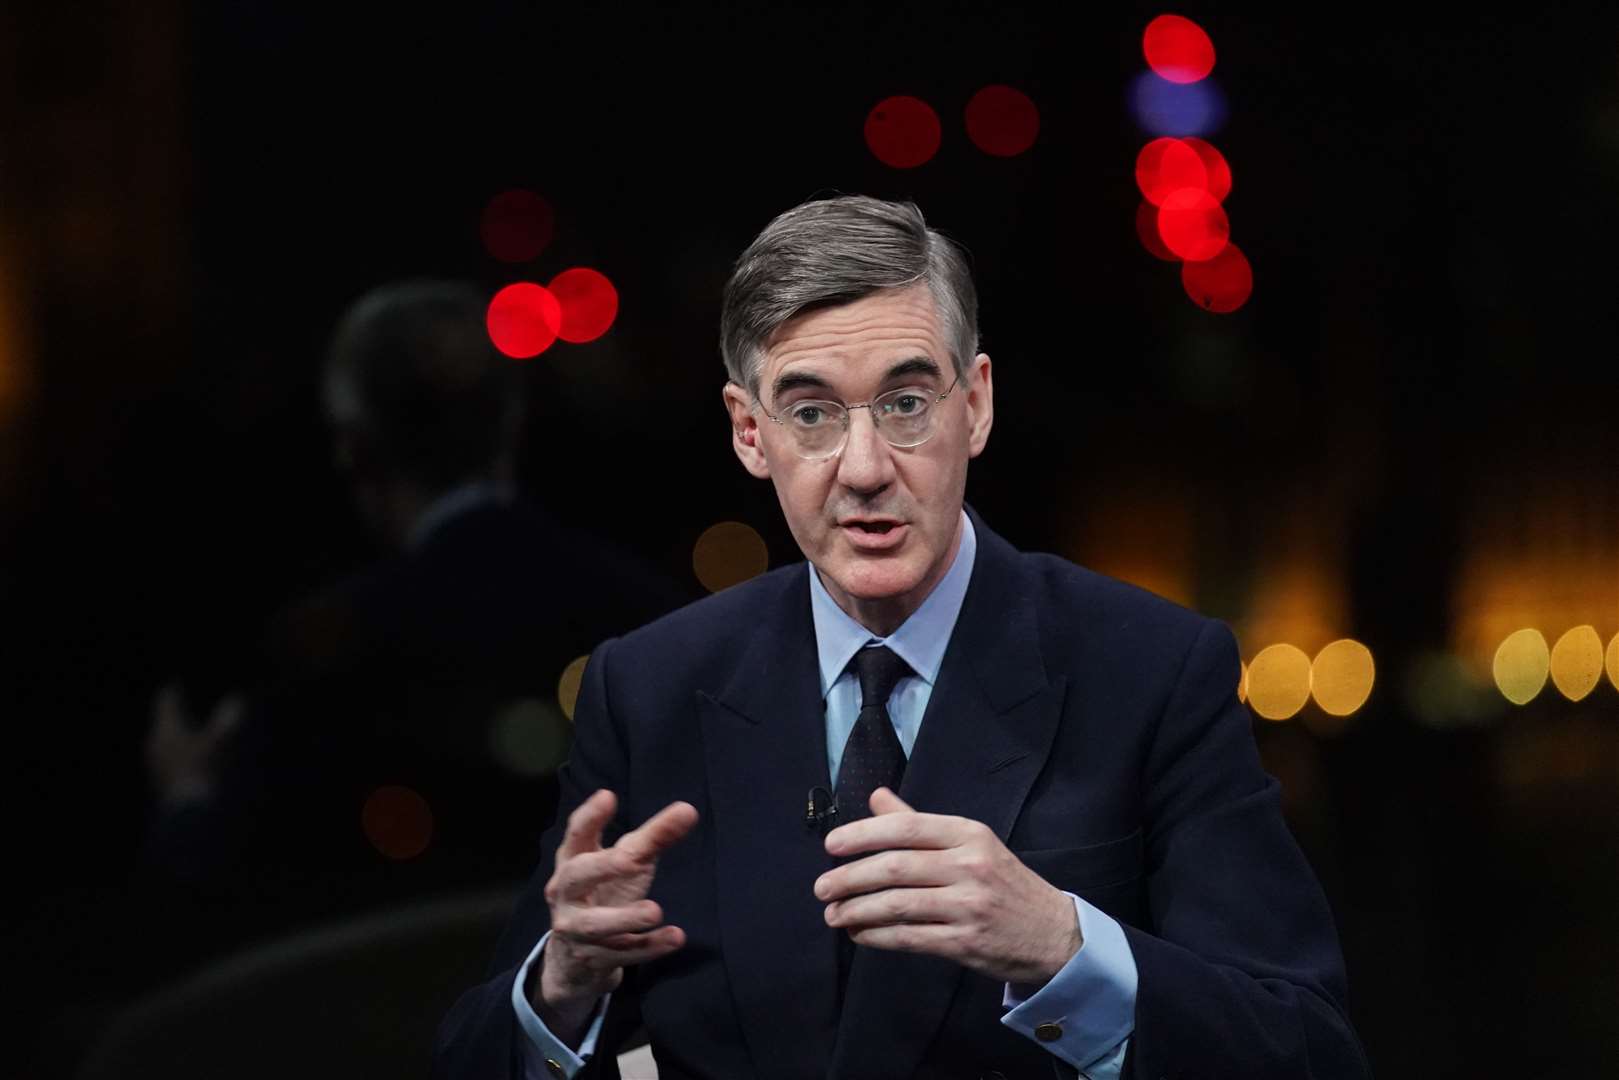 Jacob Rees-Mogg suggested there was no need for an investigation (PA)